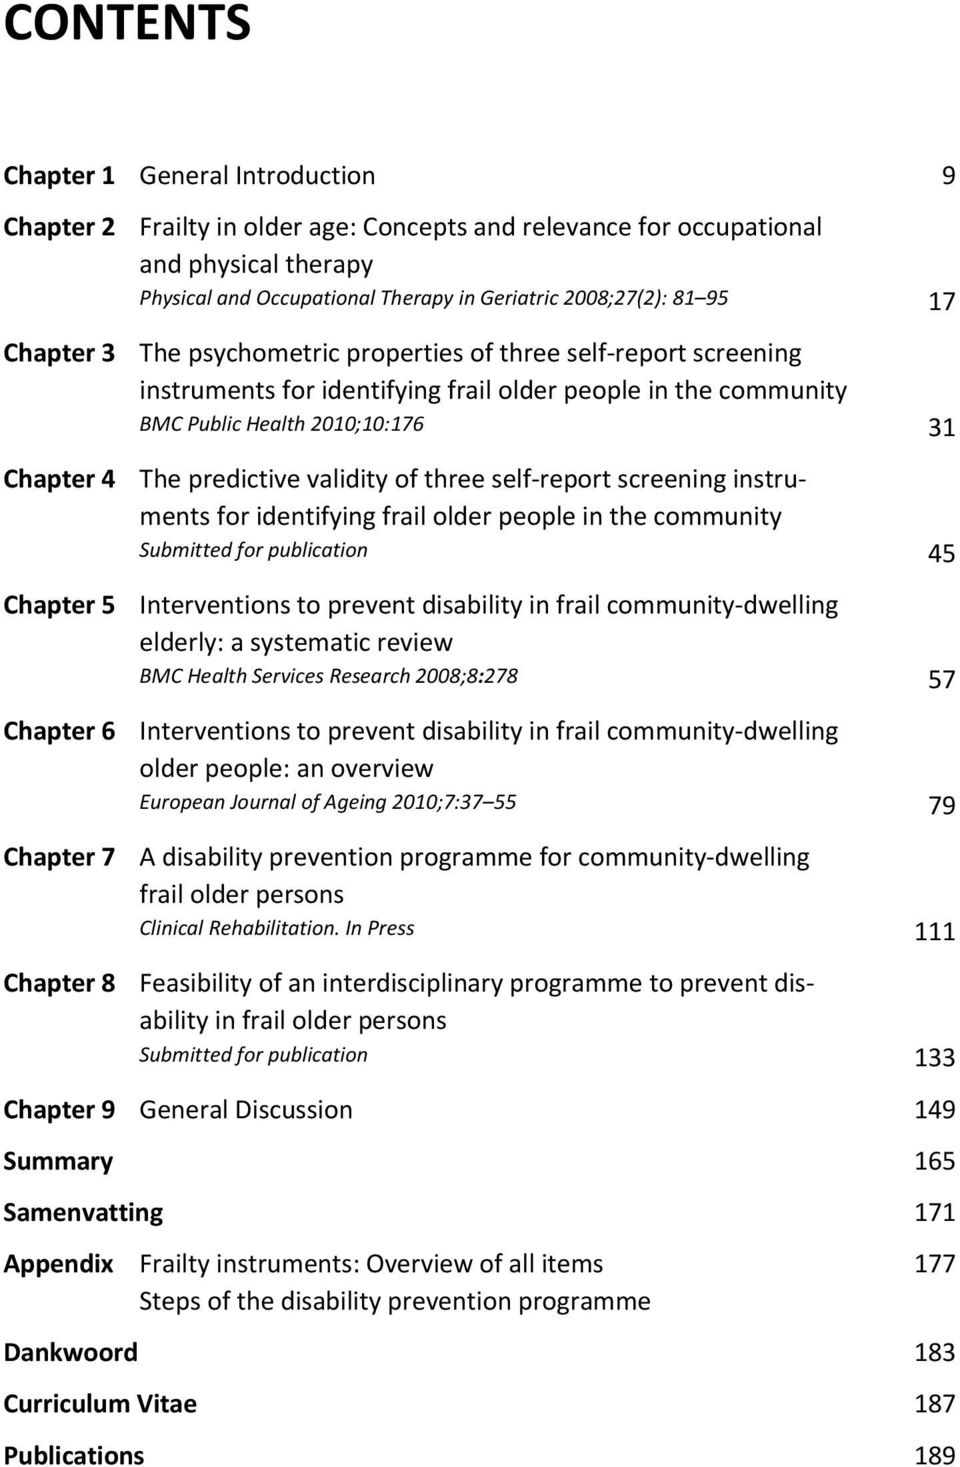 validity of three self-report screening instruments for identifying frail older people in the community Submitted for publication 45 Chapter 5 Interventions to prevent disability in frail